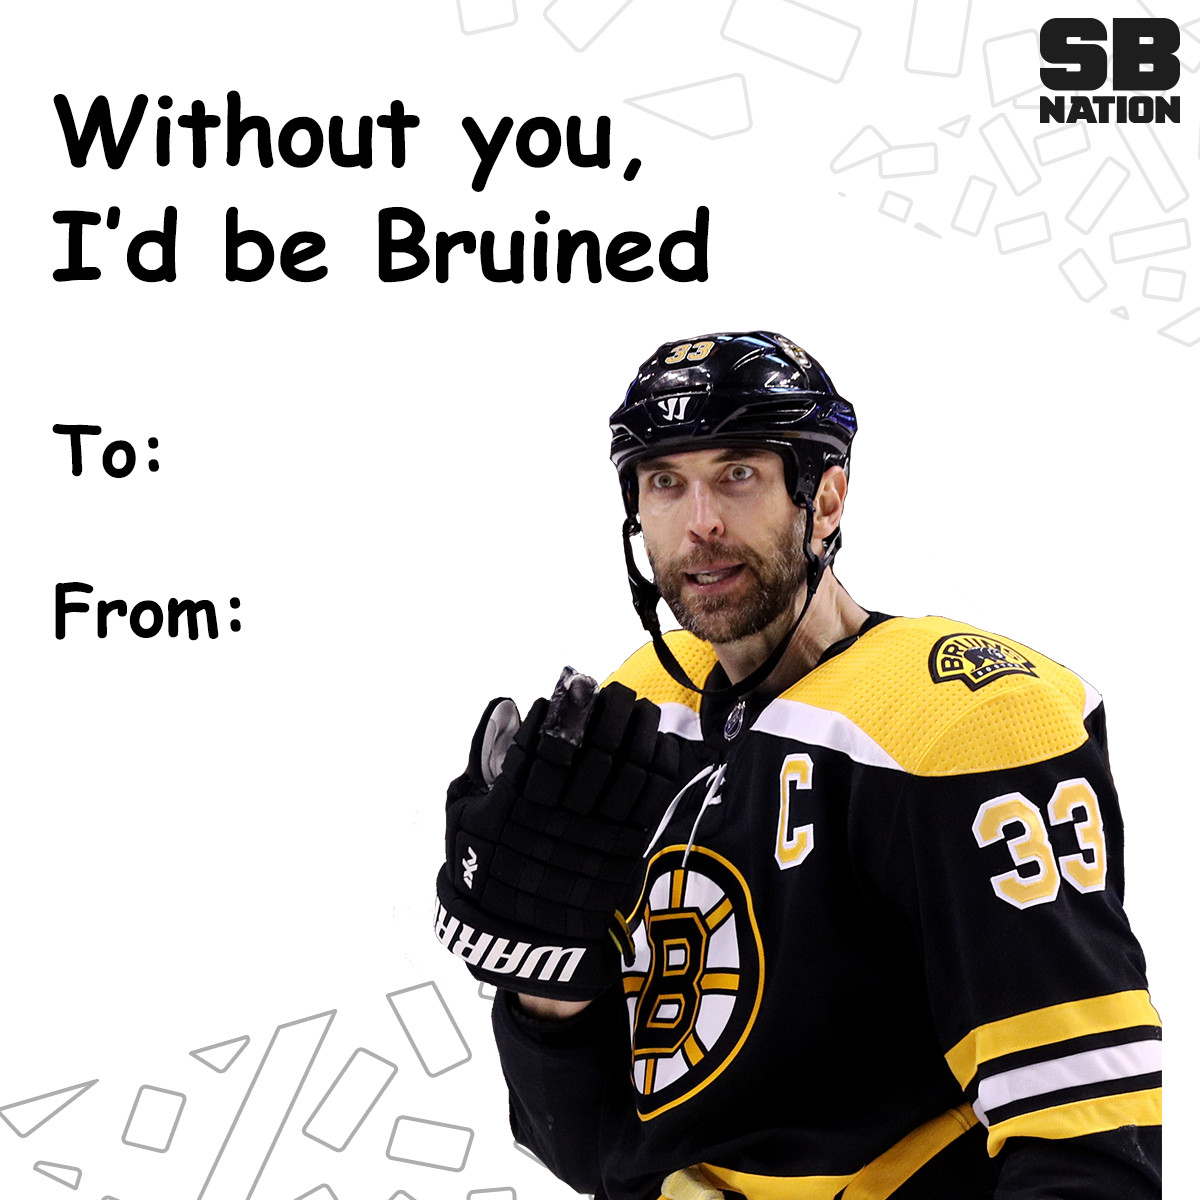 Image of Boston Bruins captain Zdeno Chara with the text “Without you, I’d be Bruined”